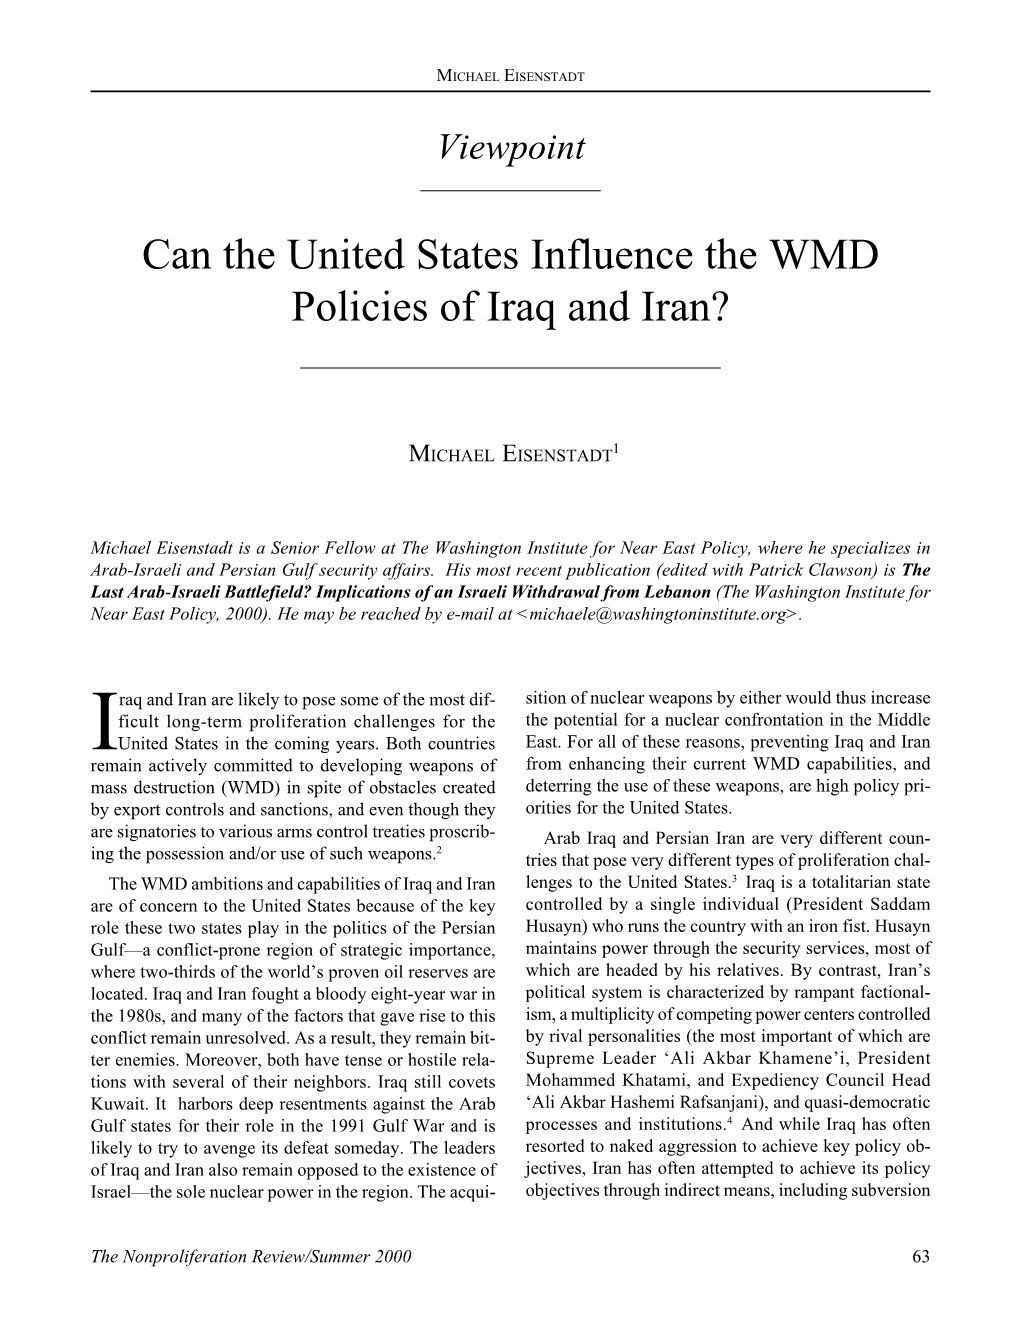 Can the United States Influence the WMD Policies of Iraq and Iran?